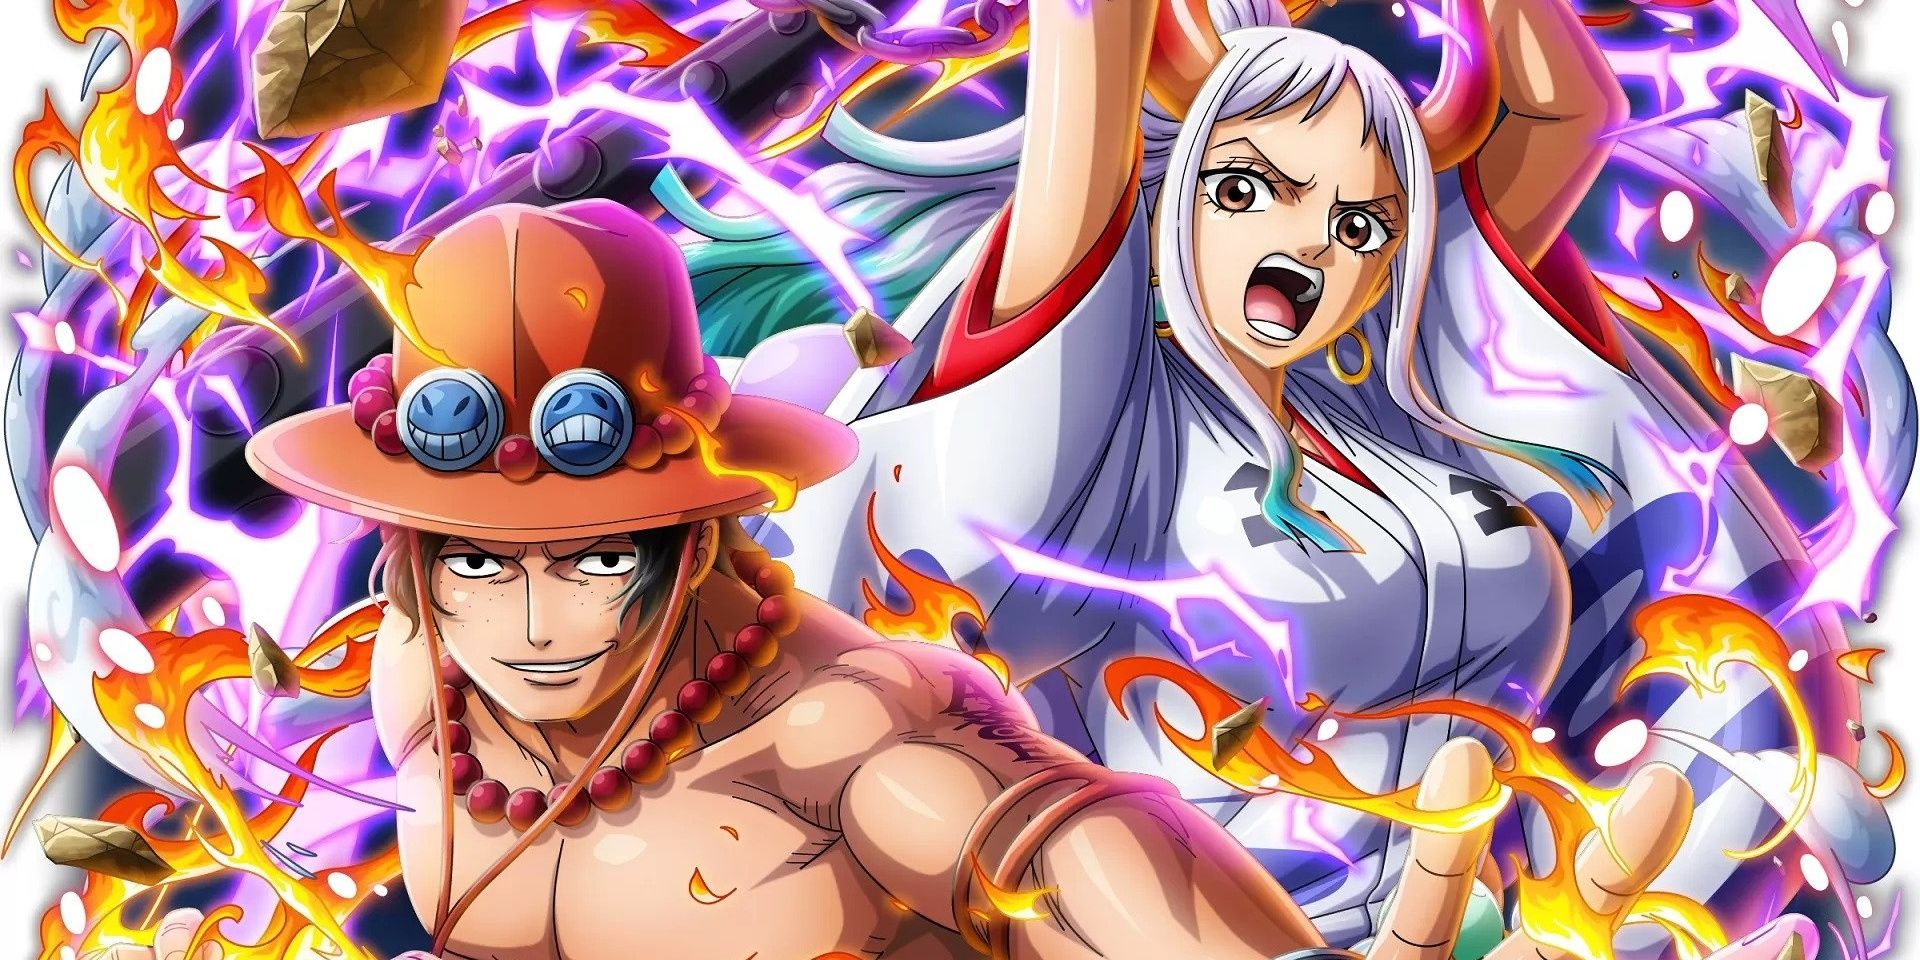 Portgas D. Ace and Yamato for the game, One Piece Treasure Cruise